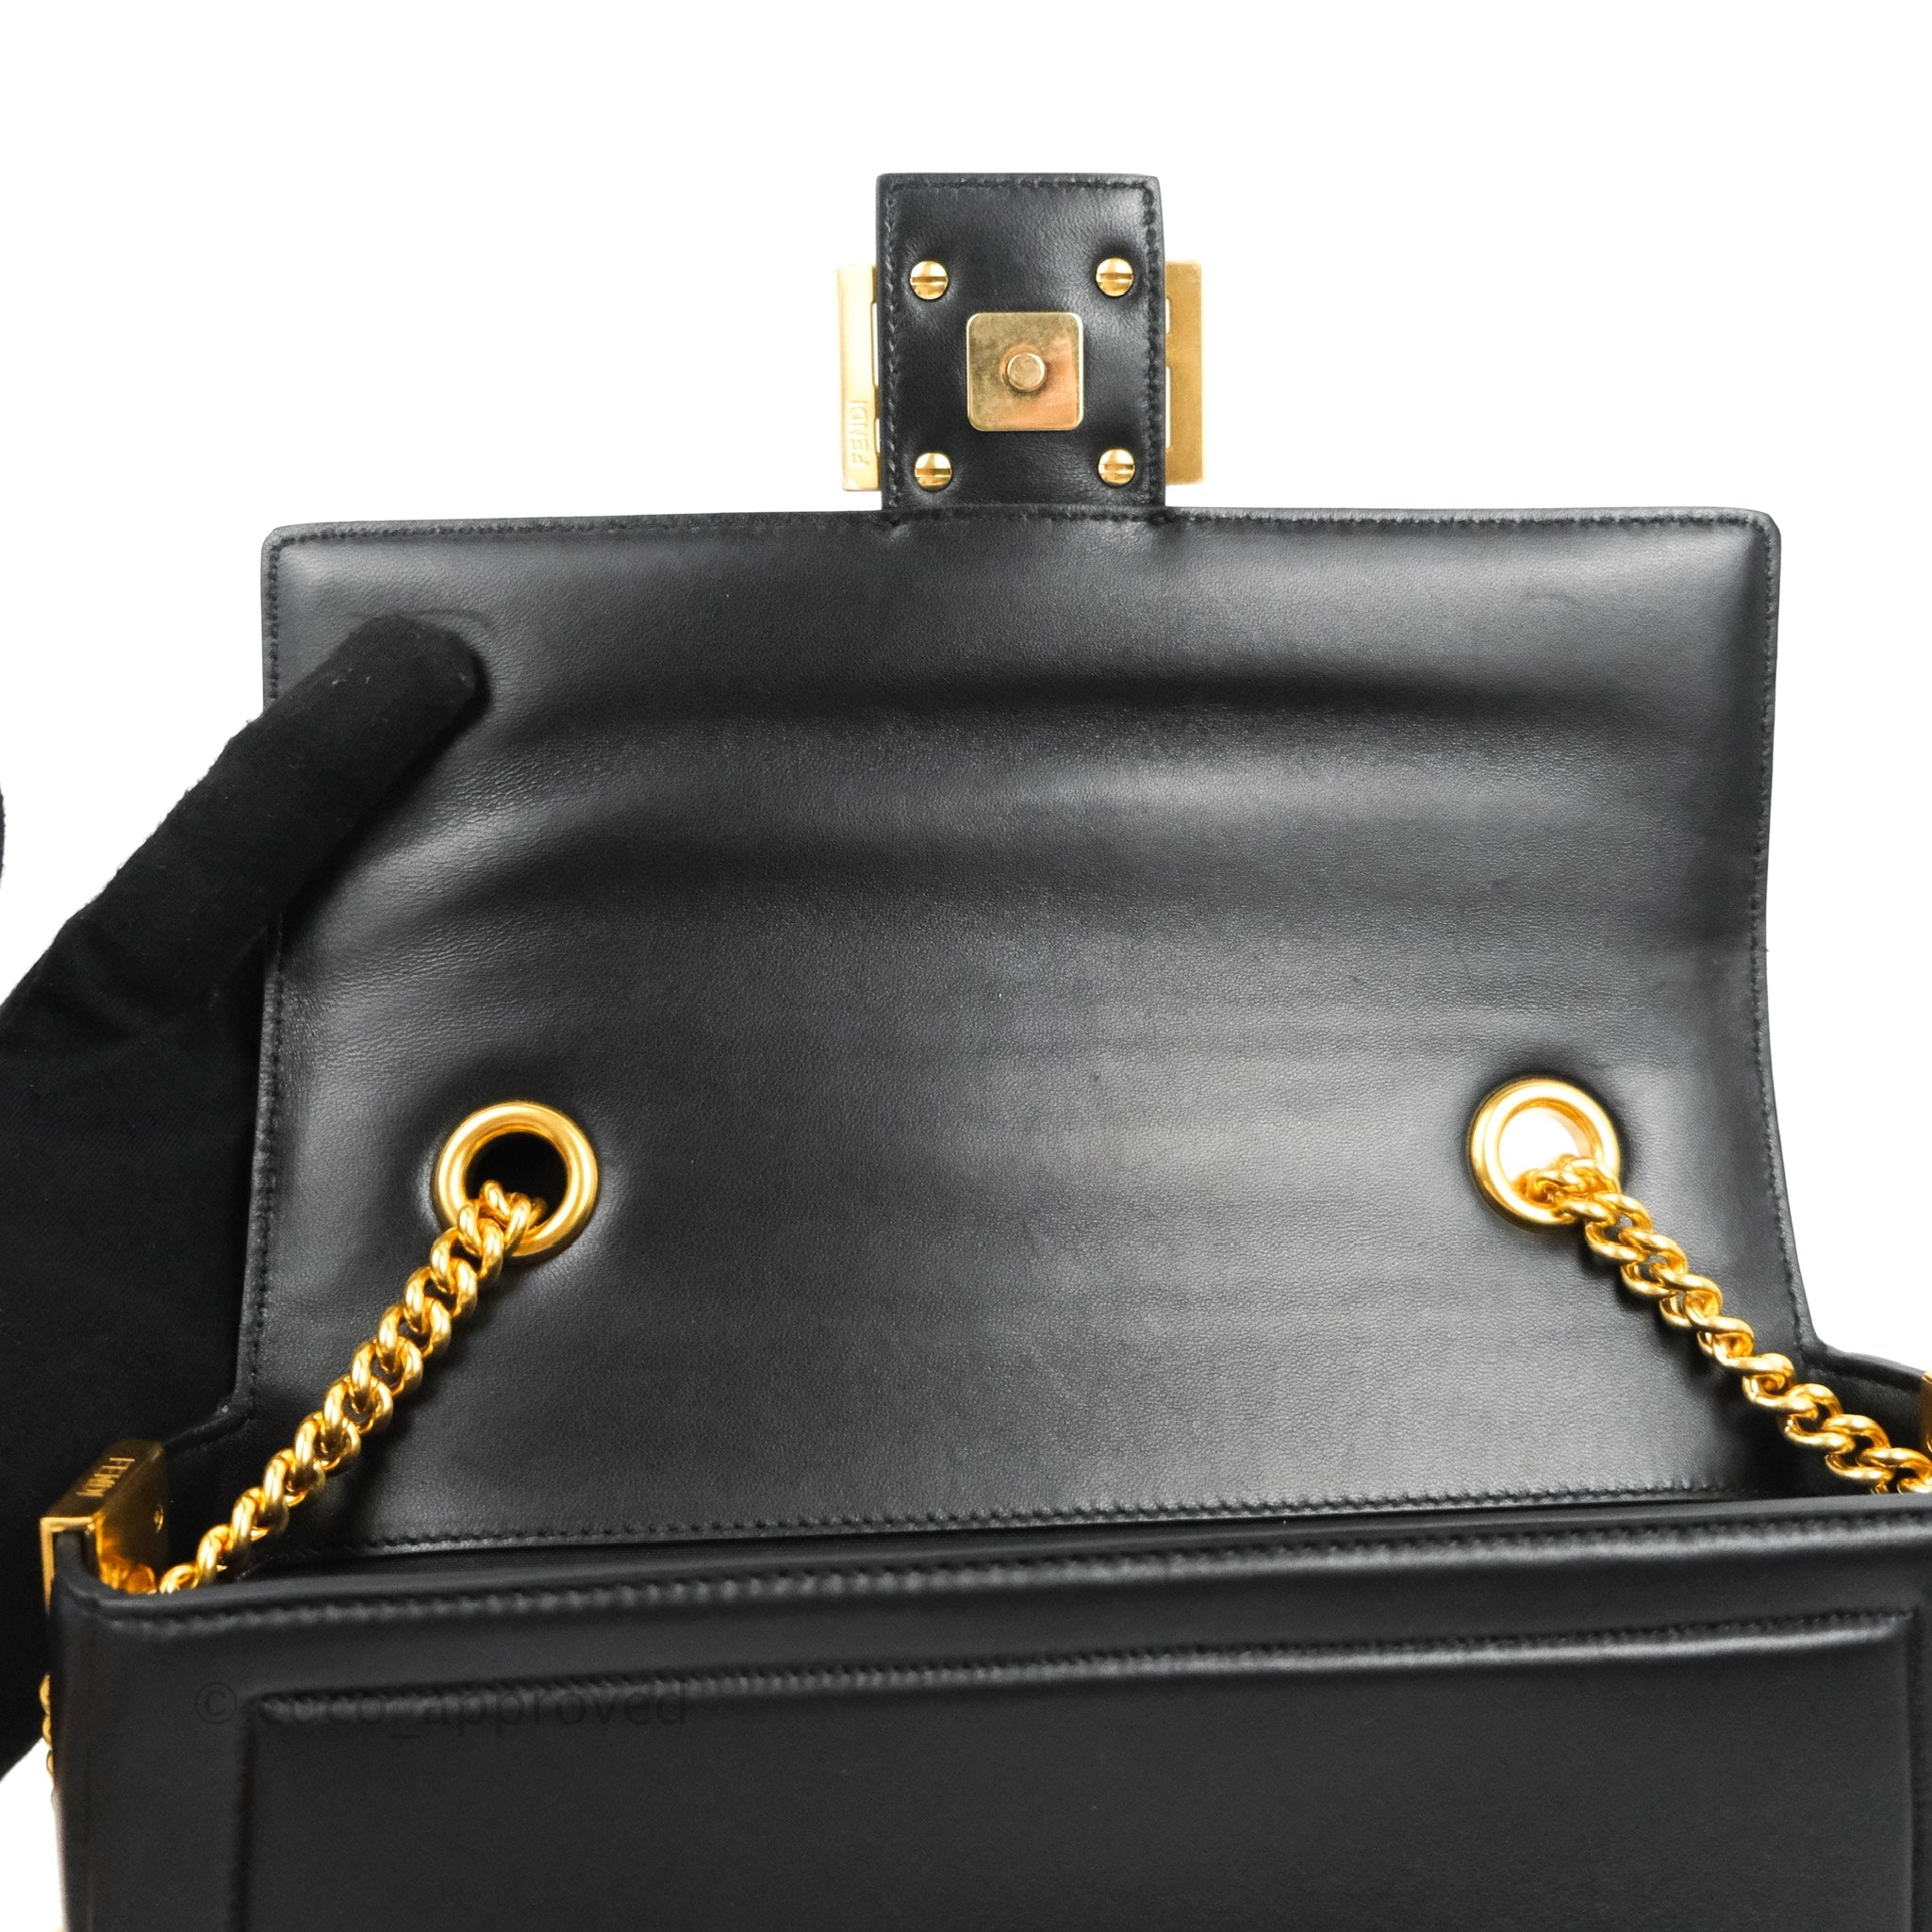 Baguette convertible leather bag Fendi Black in Leather - 36357497